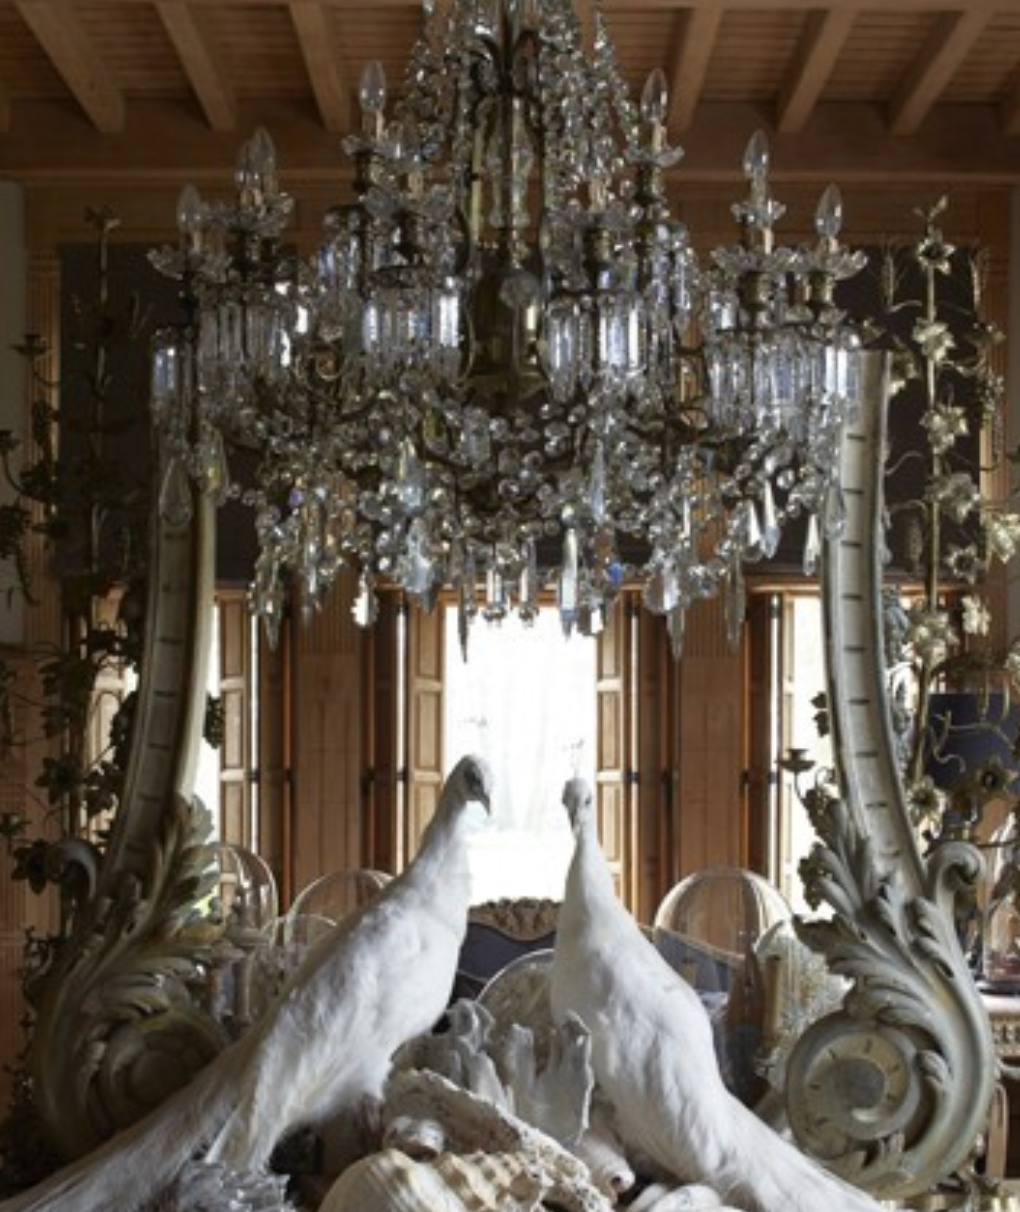 Pairing antique crystal chandeliers with concrete elements at The Crown Collection